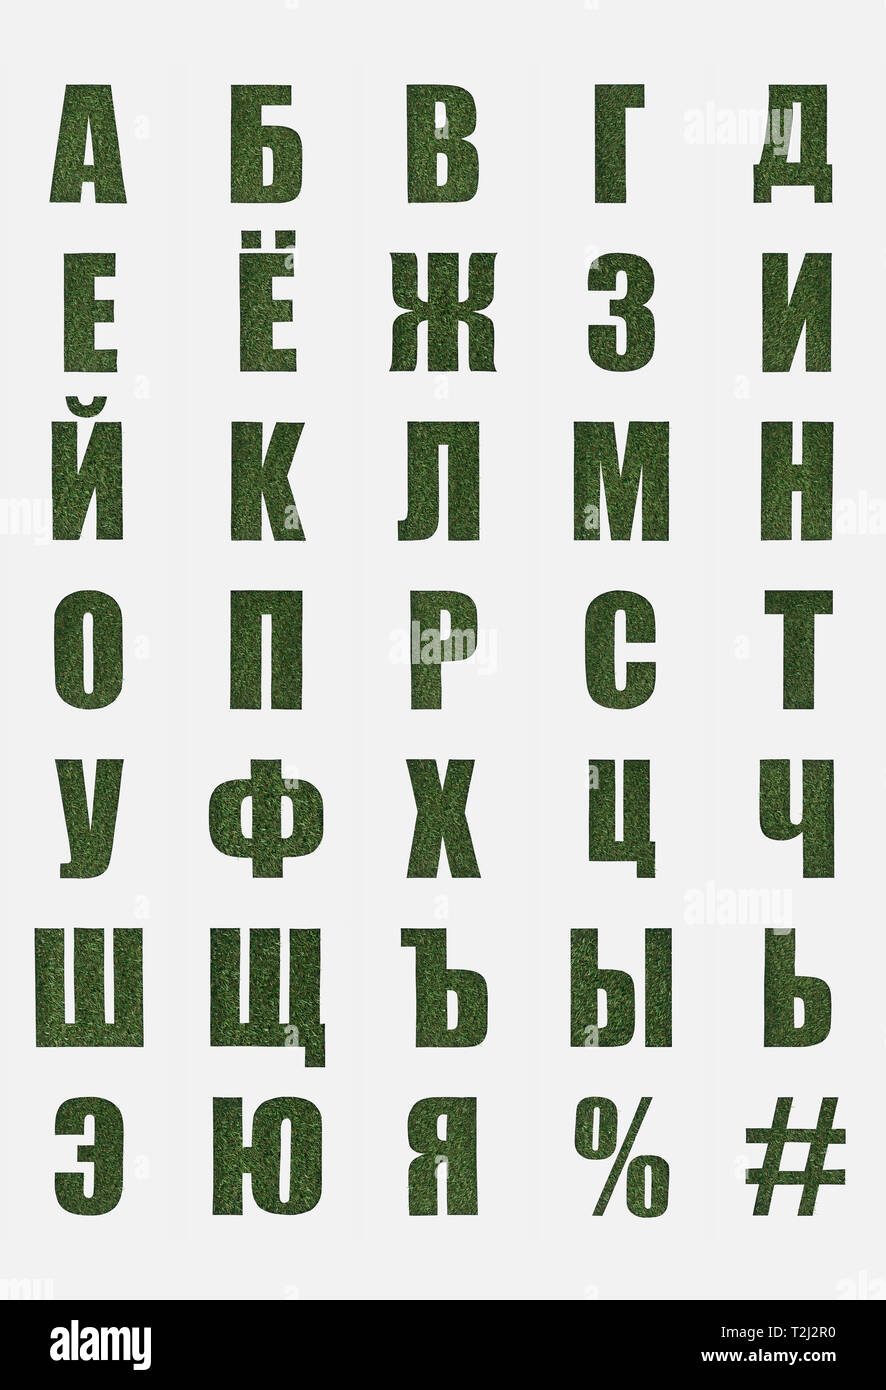 Lowercase russian Alphabet Lore Band 